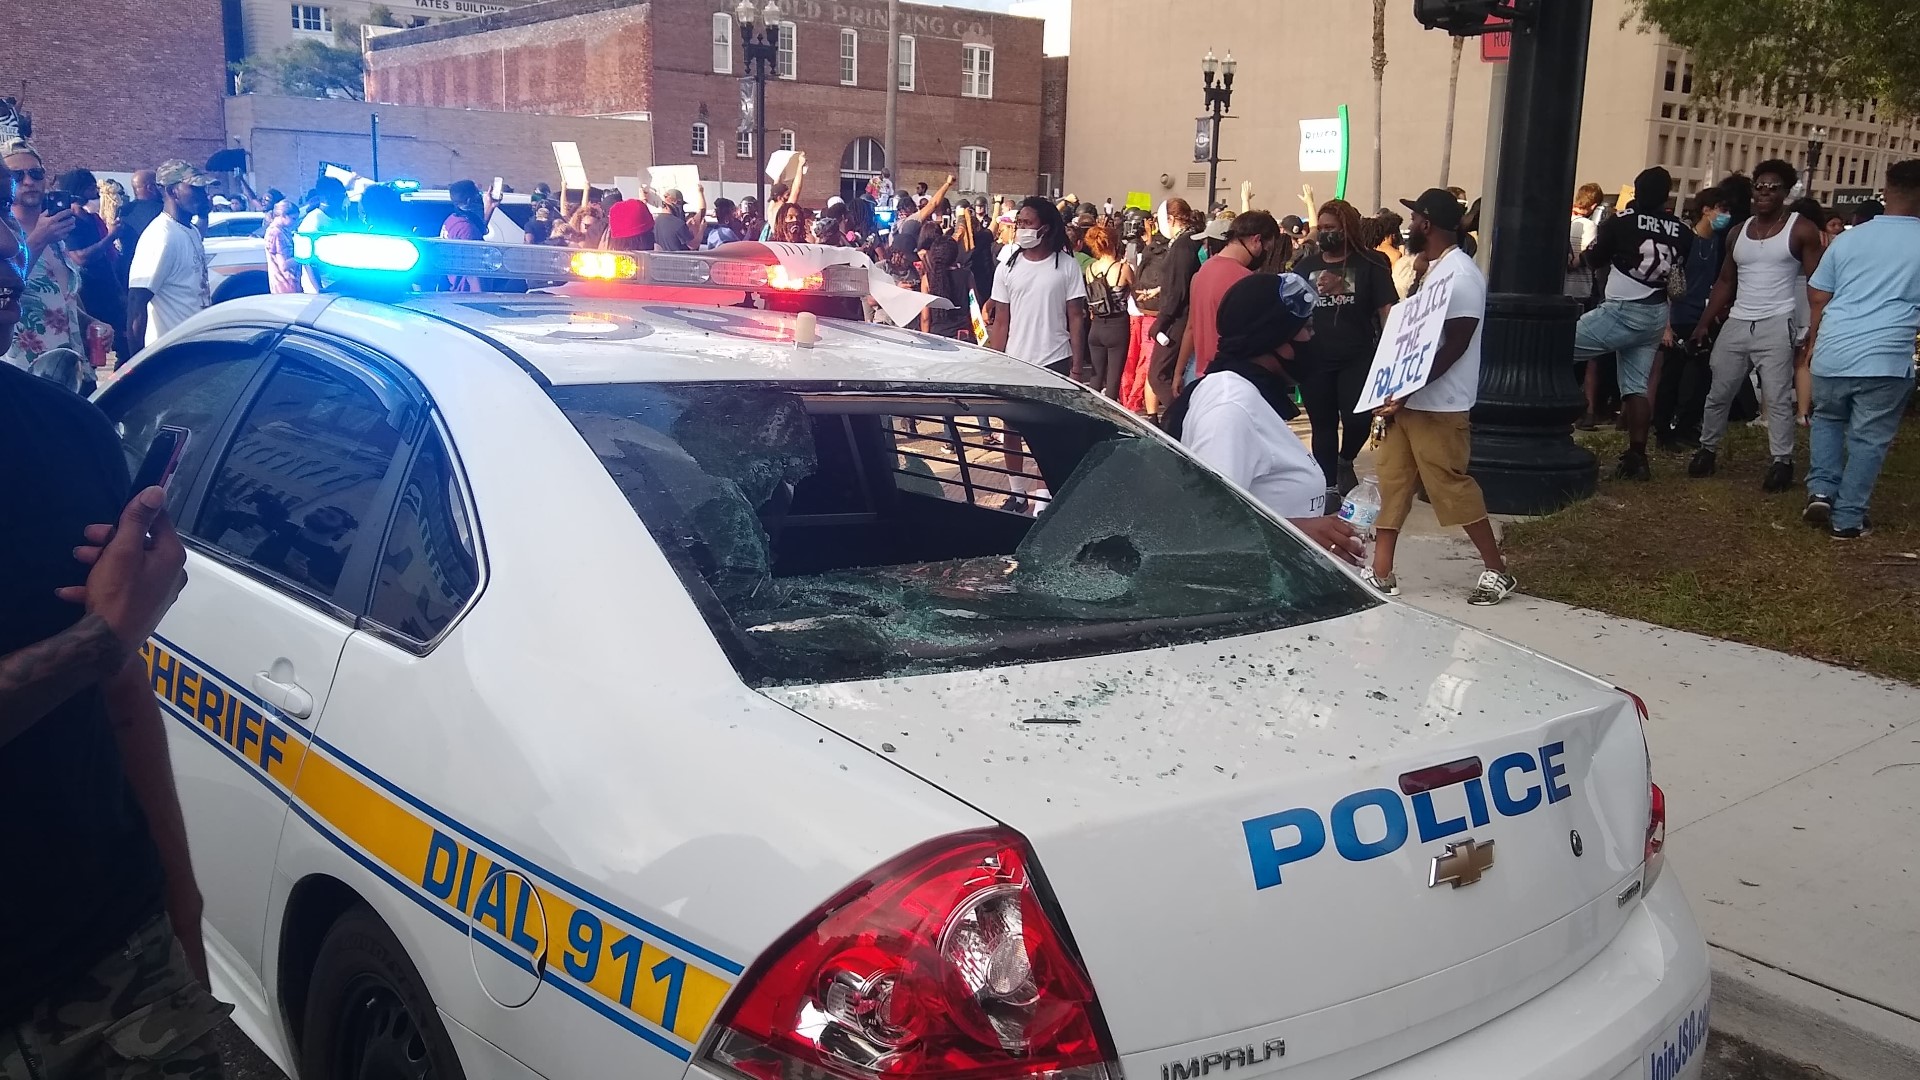 Protesters and police clash in the wake of the deaths of George Floyd, Ahmaud Arbery and Breonna Taylor.